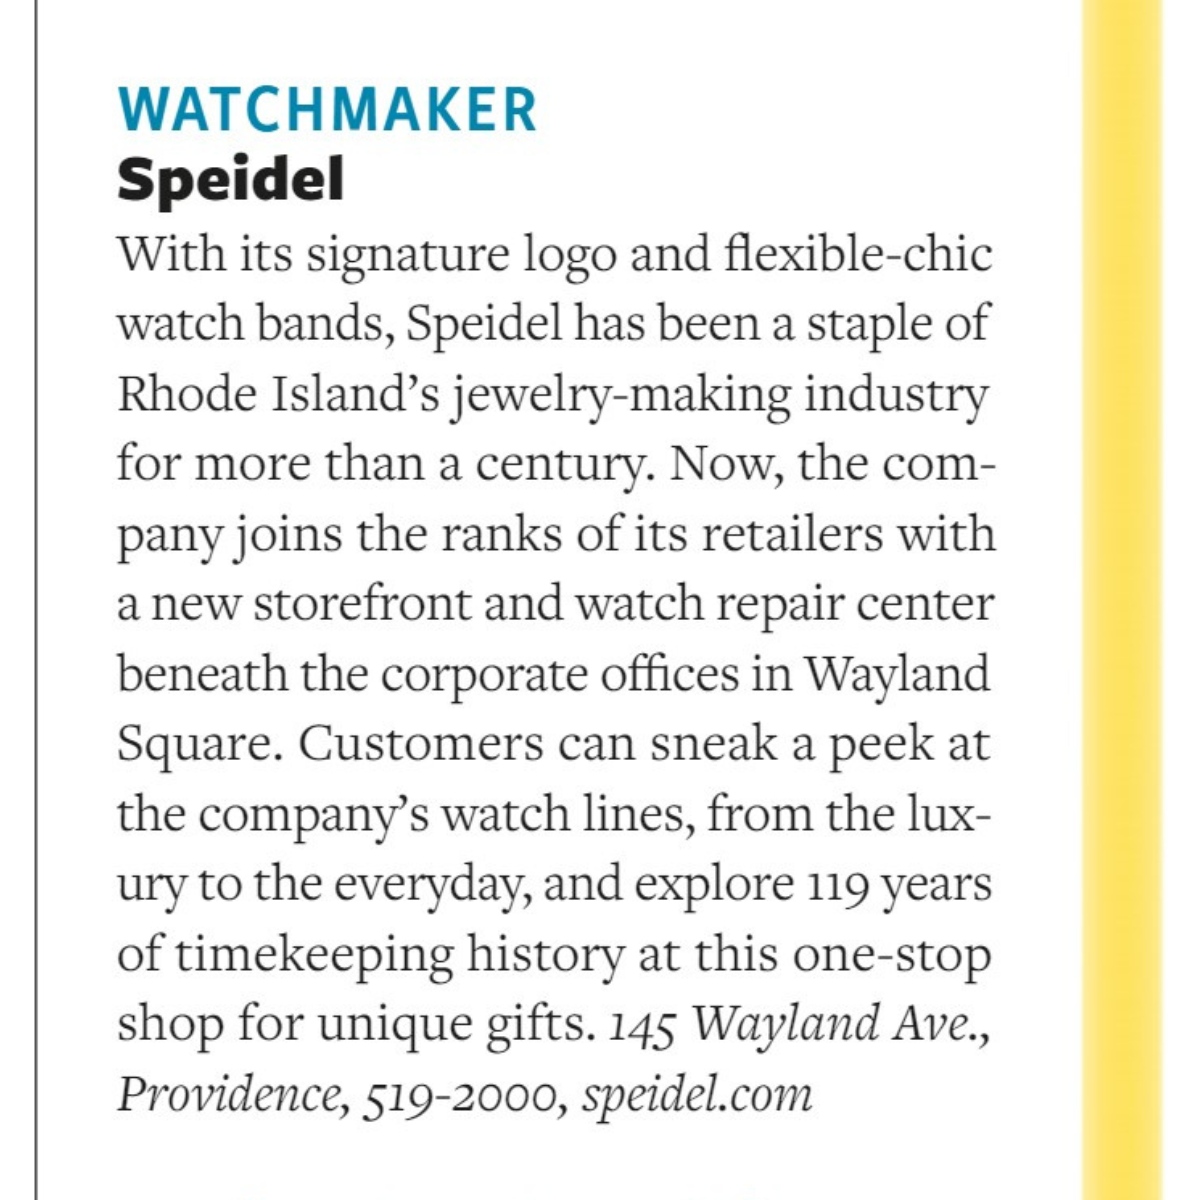 What an honor! A huge thank you to @RIMonthly for featuring Speidel as RI's best watchmaker in their Best of RI winners in their 30th Annual Best of RI! #Speidel 1904 #BestofRI #Winner #Grateful Copyright permission granted by Rhode Island Monthly Communications 2023